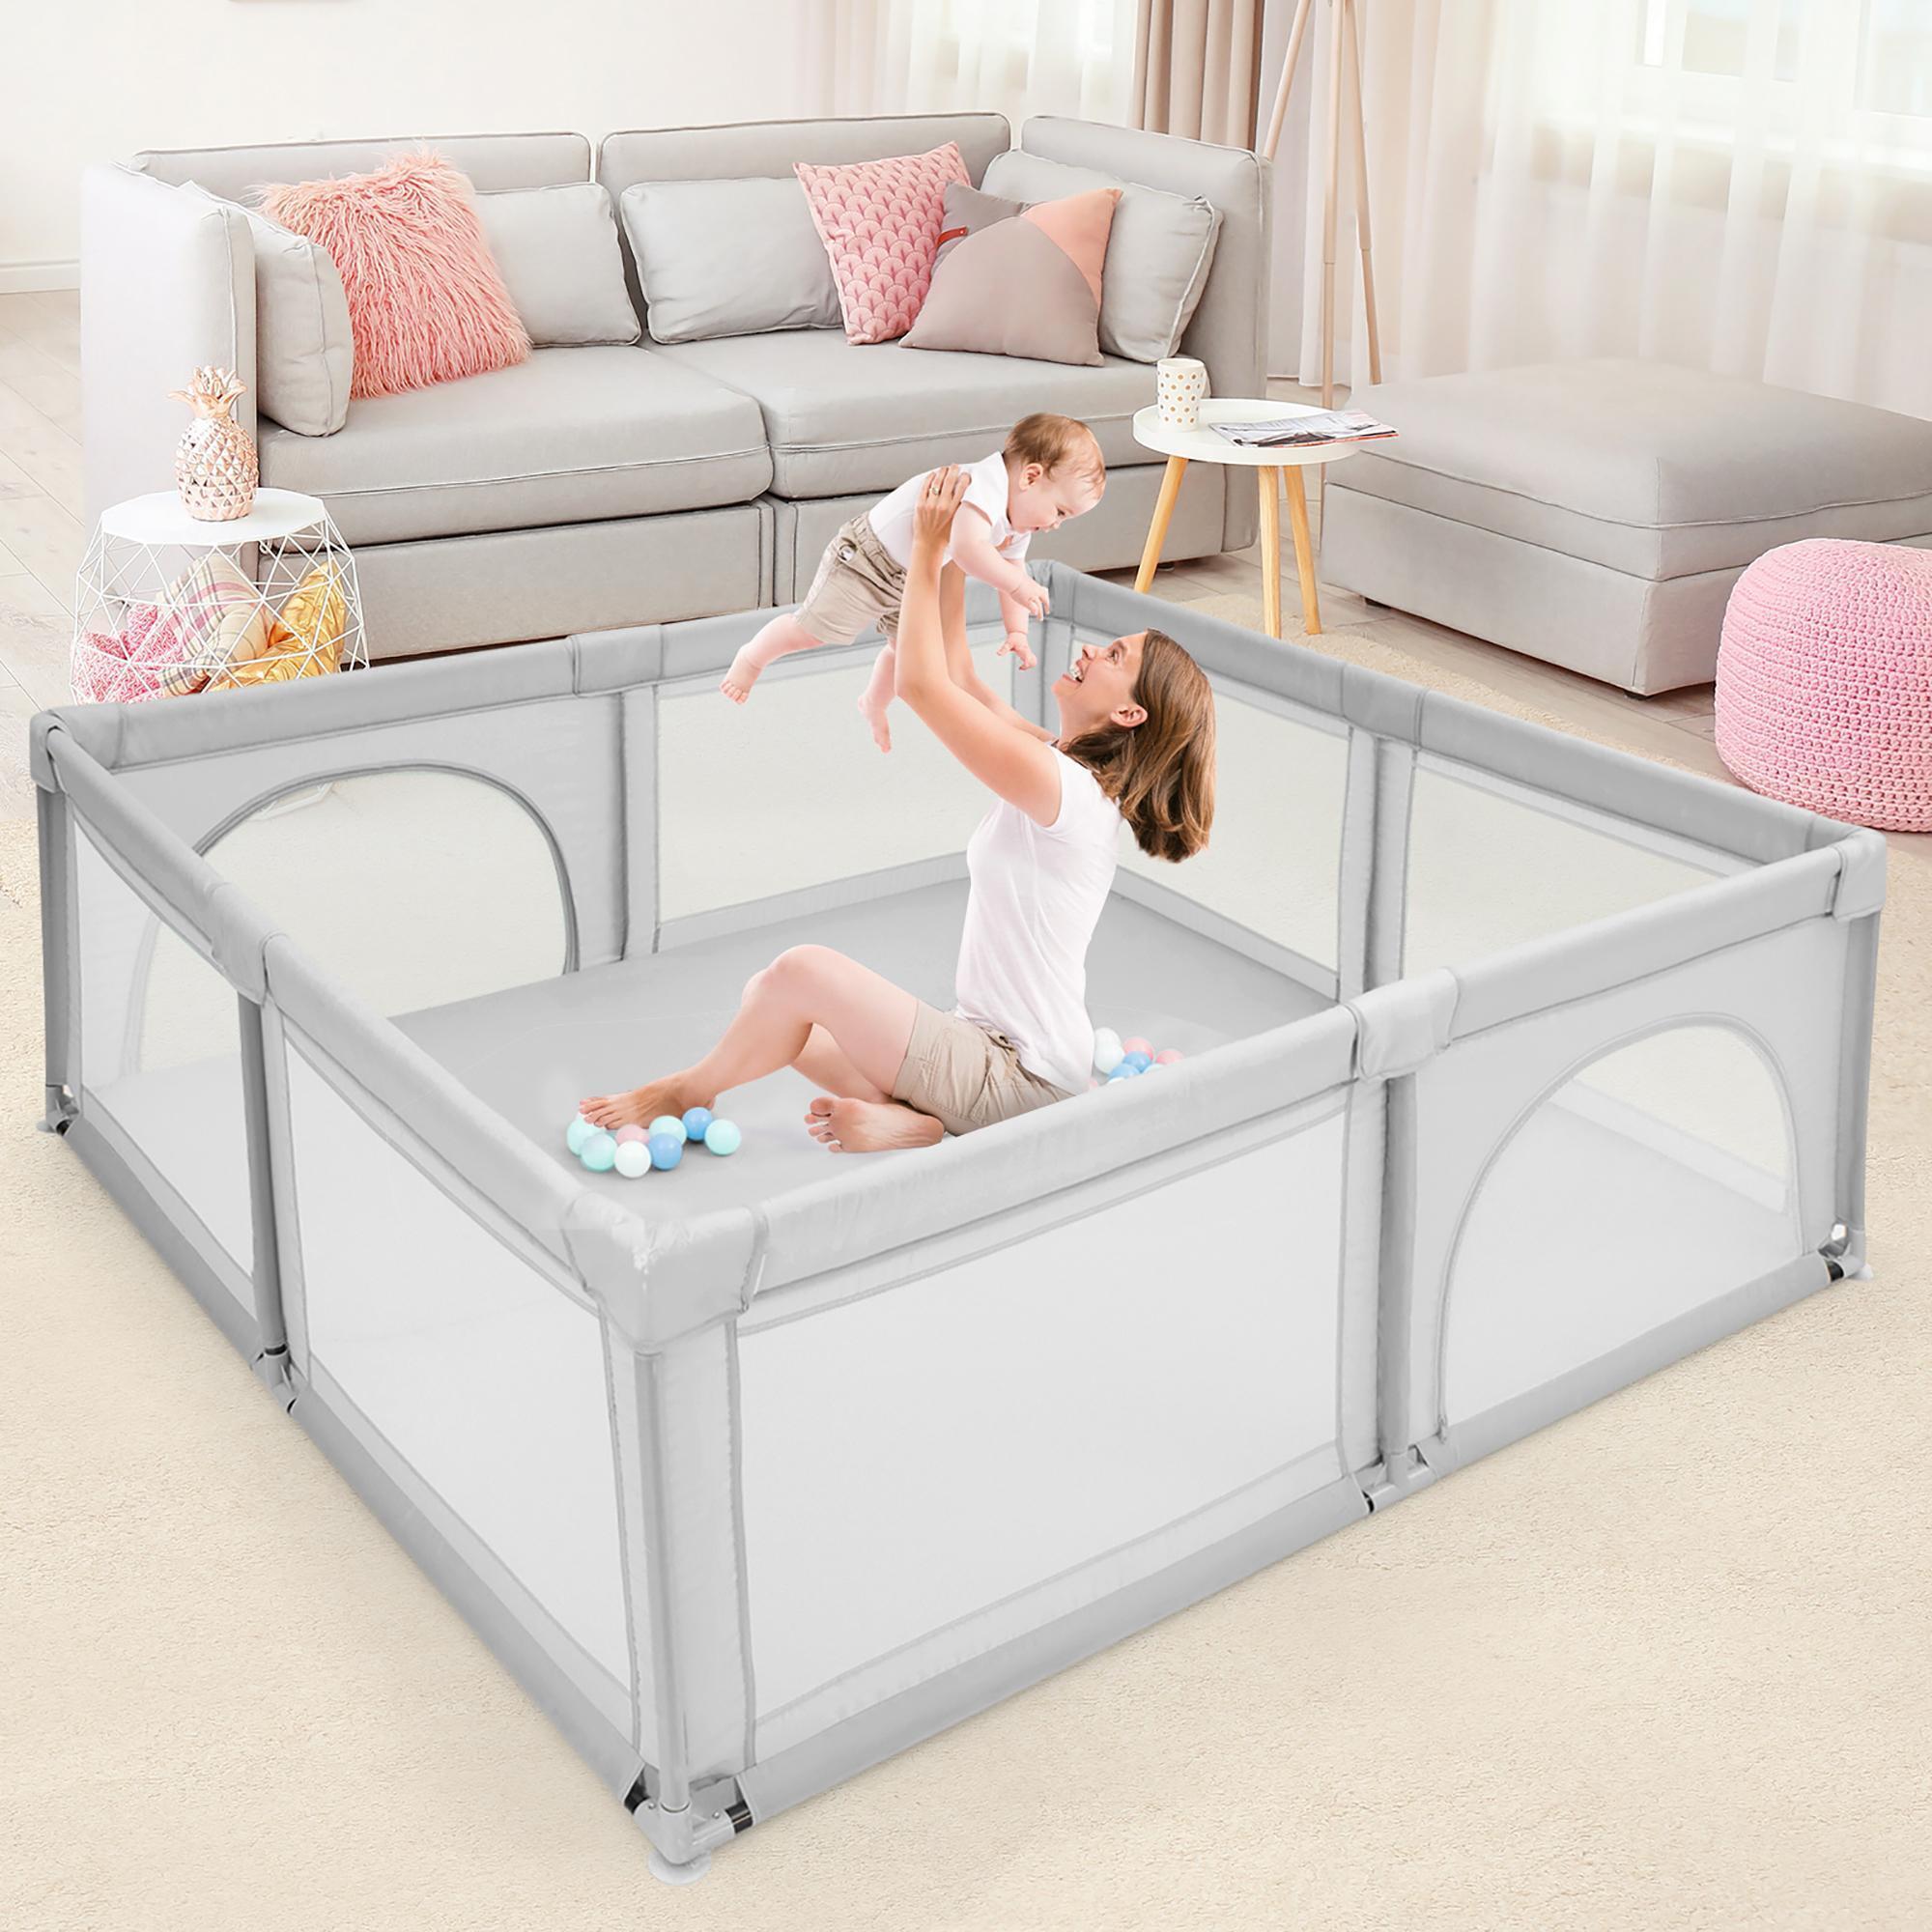 Costway Baby Playpen Infant Large Safety Play Center Yard w/ 50 Ocean Balls Grey\Colorful\Blue alternate image